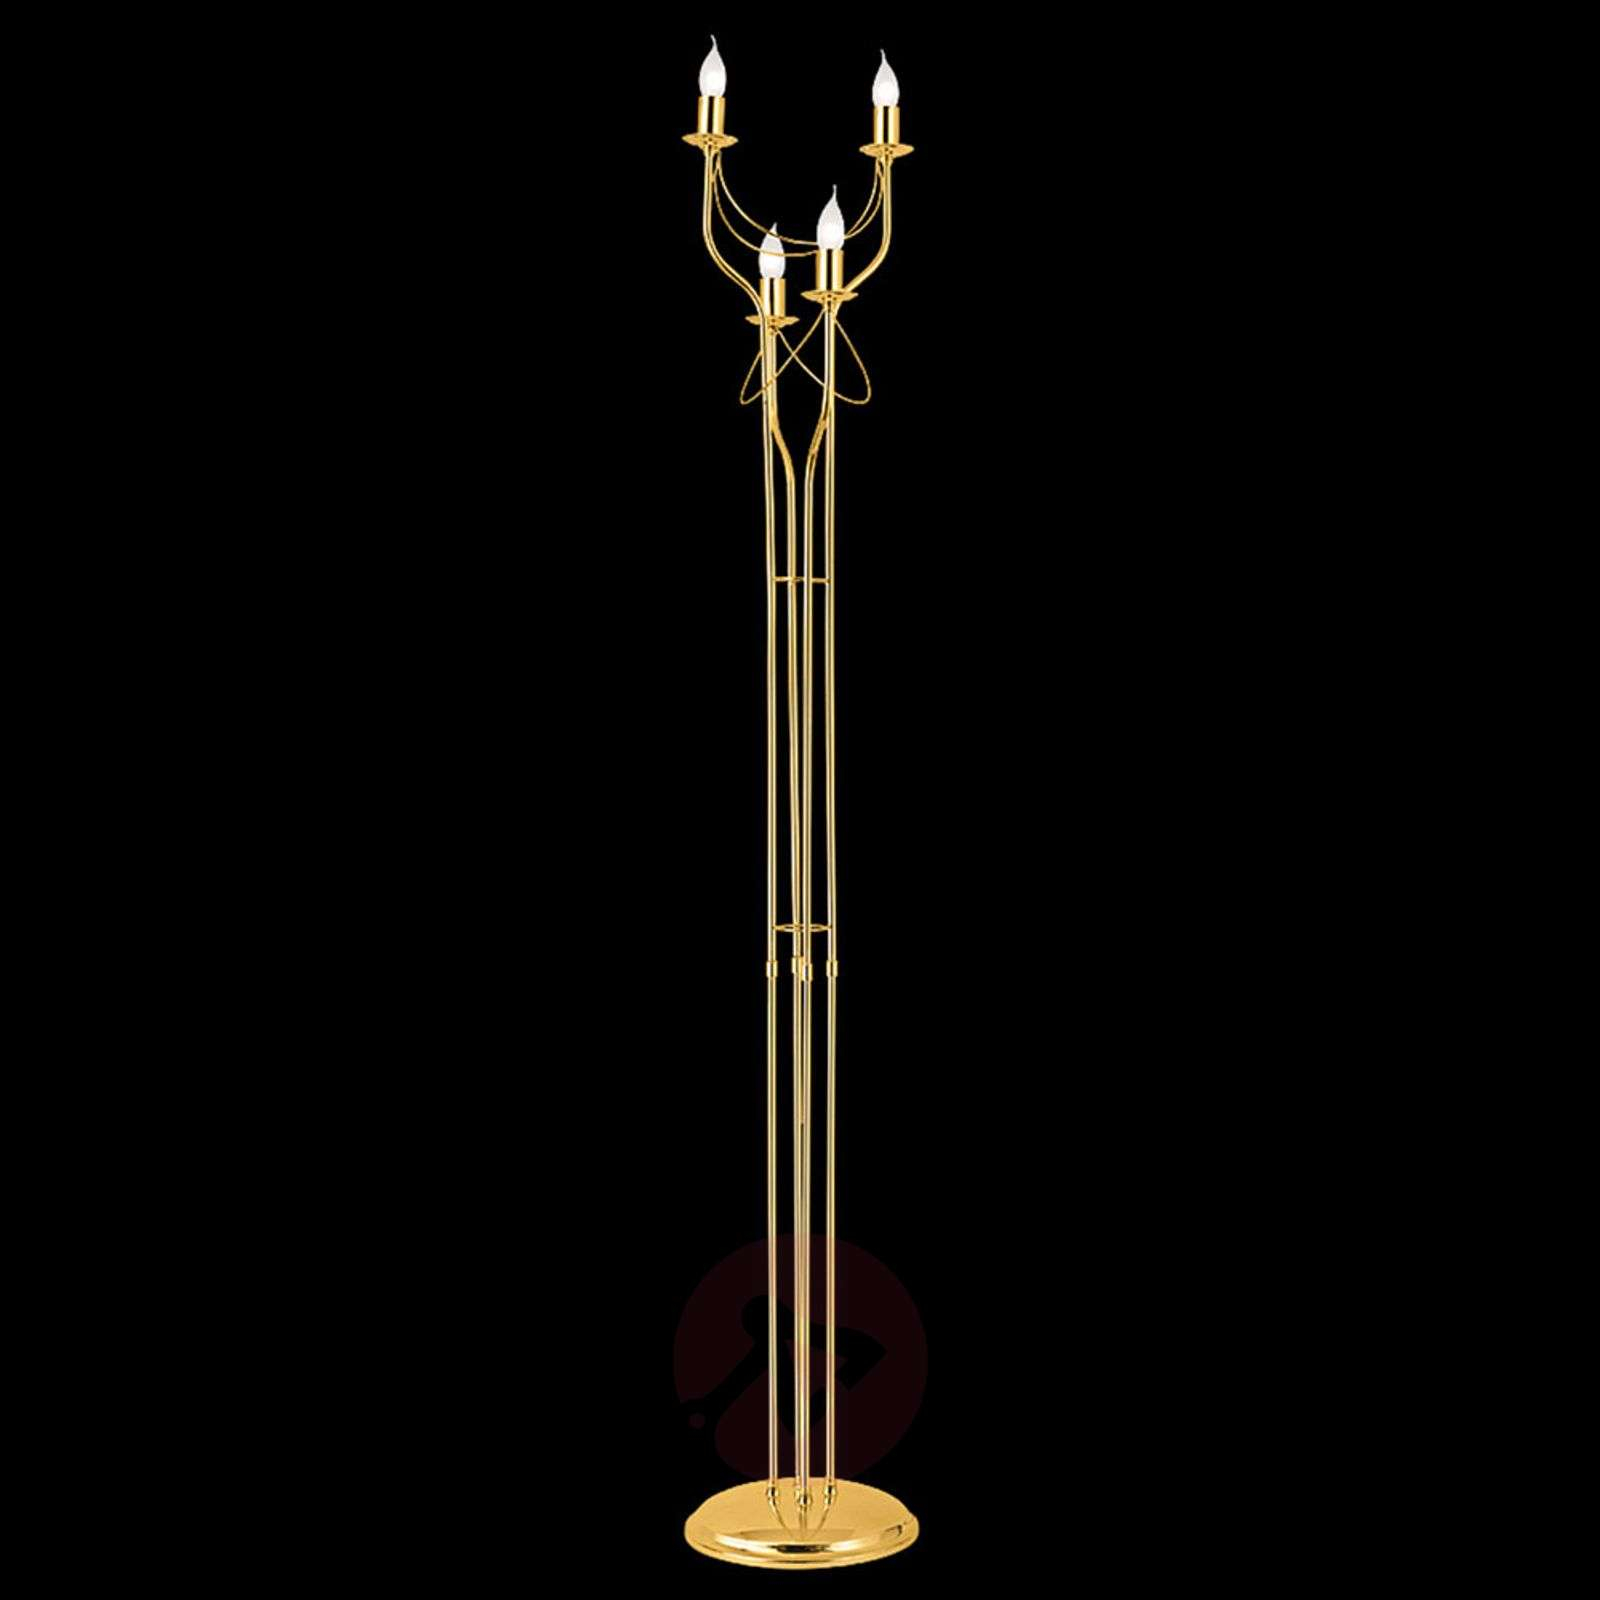 Four Bulb Floor Lamp Retro With A Gold Finish intended for proportions 1600 X 1600